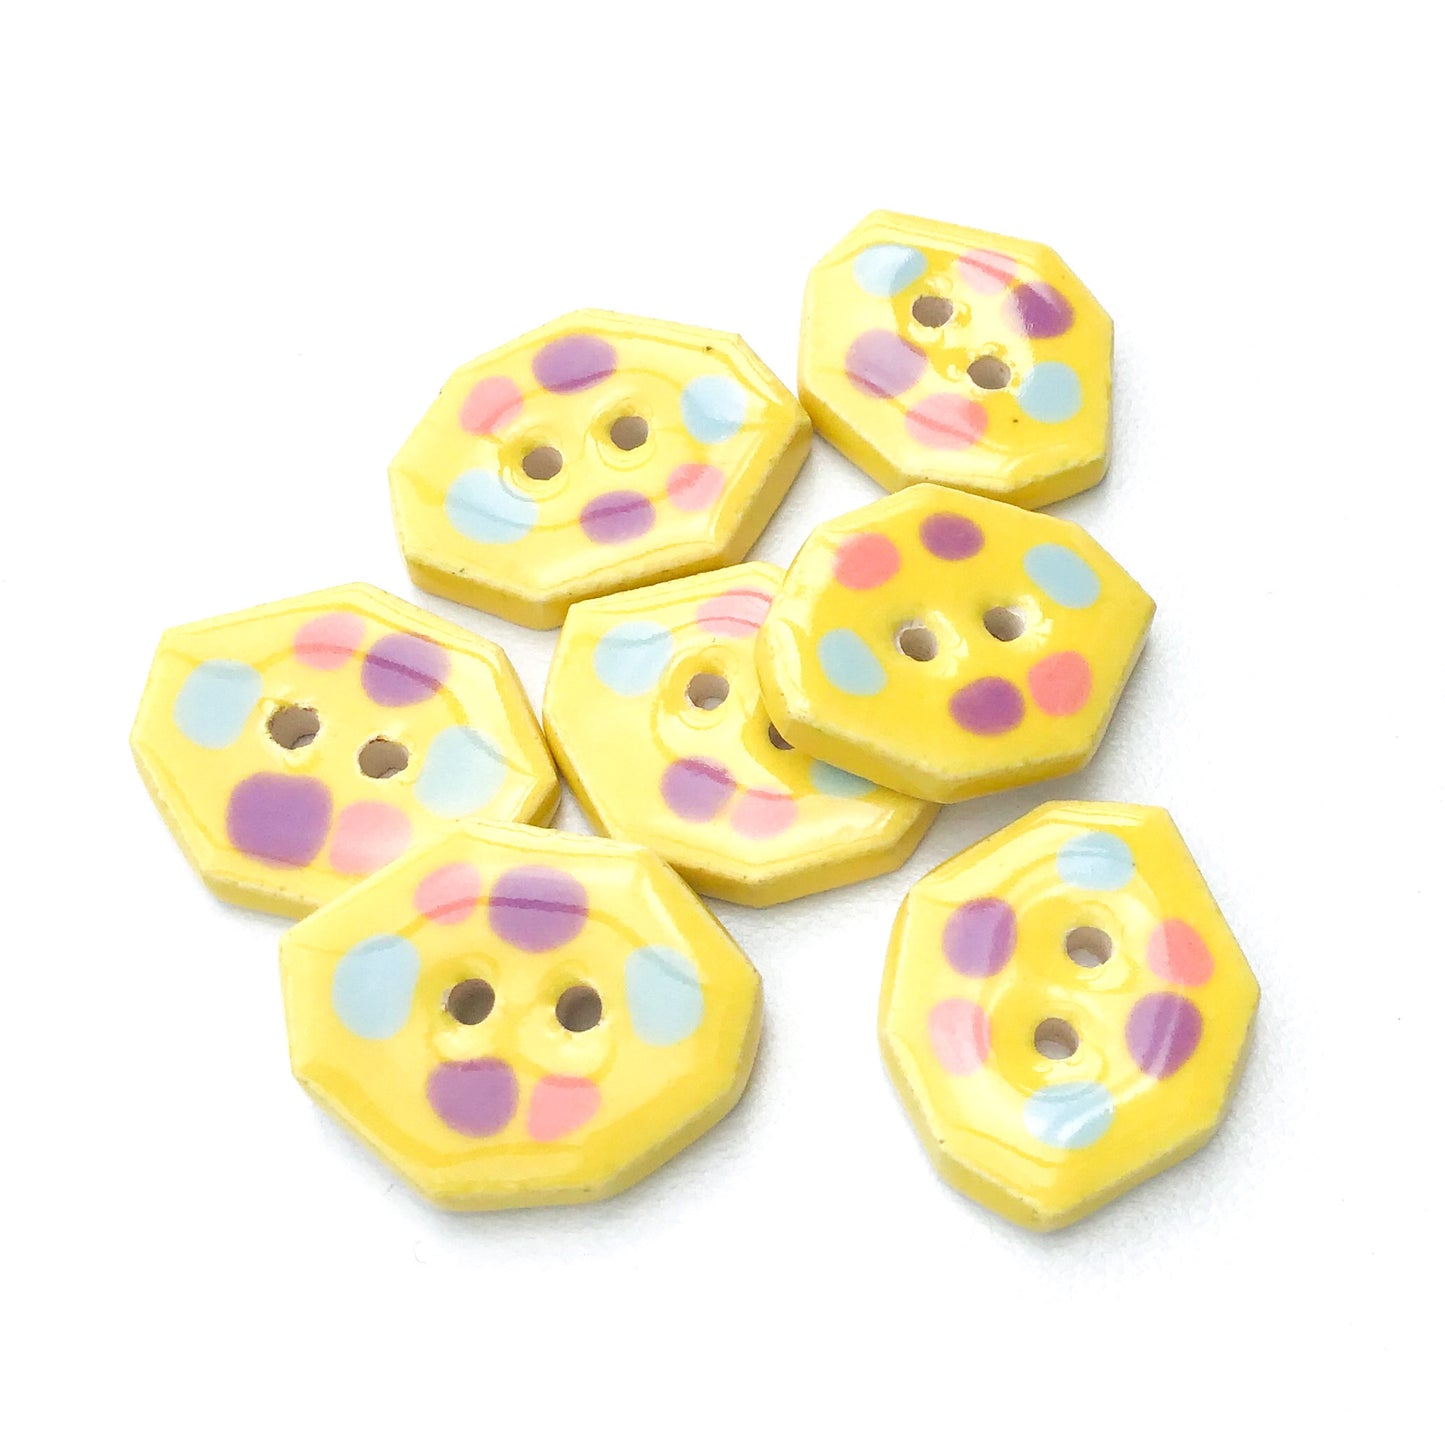 Geometric Colorful Dotted Buttons - Unique Clay Buttons - Bright Yellow with Pastel Dots - 5/8" x 7/8"- 7 Pack